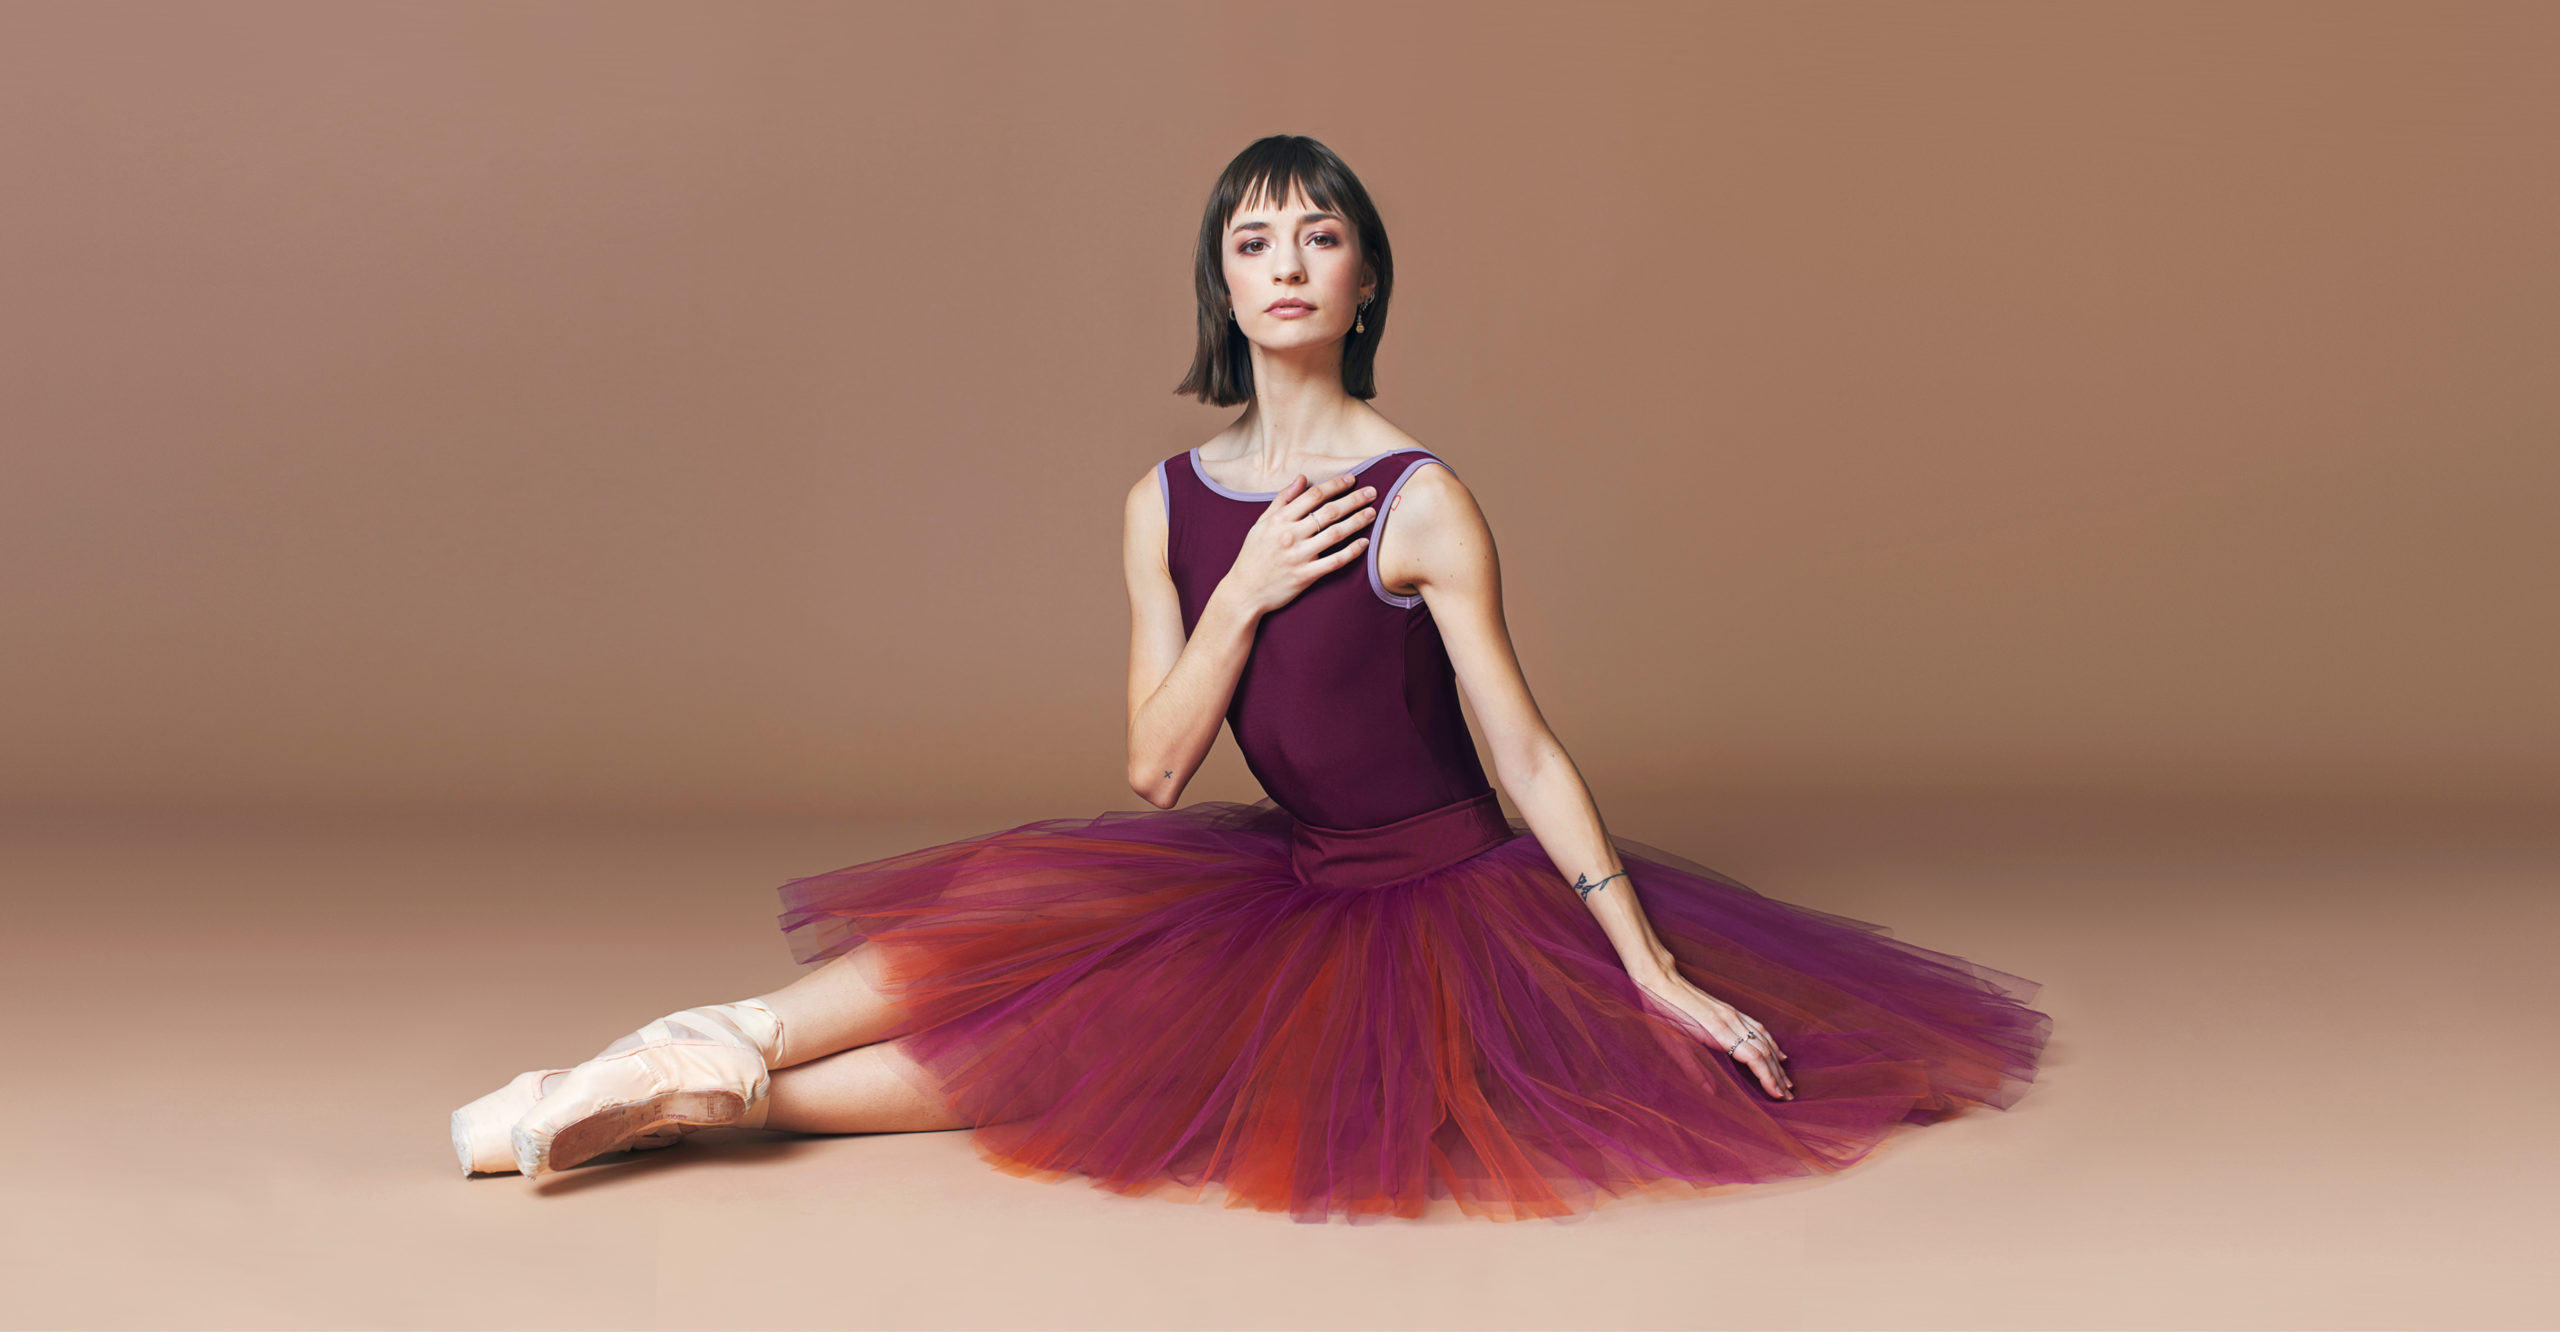 Mackenzie Richter wears a burgundy leotard, a burgundy and orange knee-length practice and pointe shoes. She sits on the floor with her legs extended out to the left, her right foot crossing over her left ankle. She brings her right hand to her chest and leans slightly forward, looking directly at the camera.